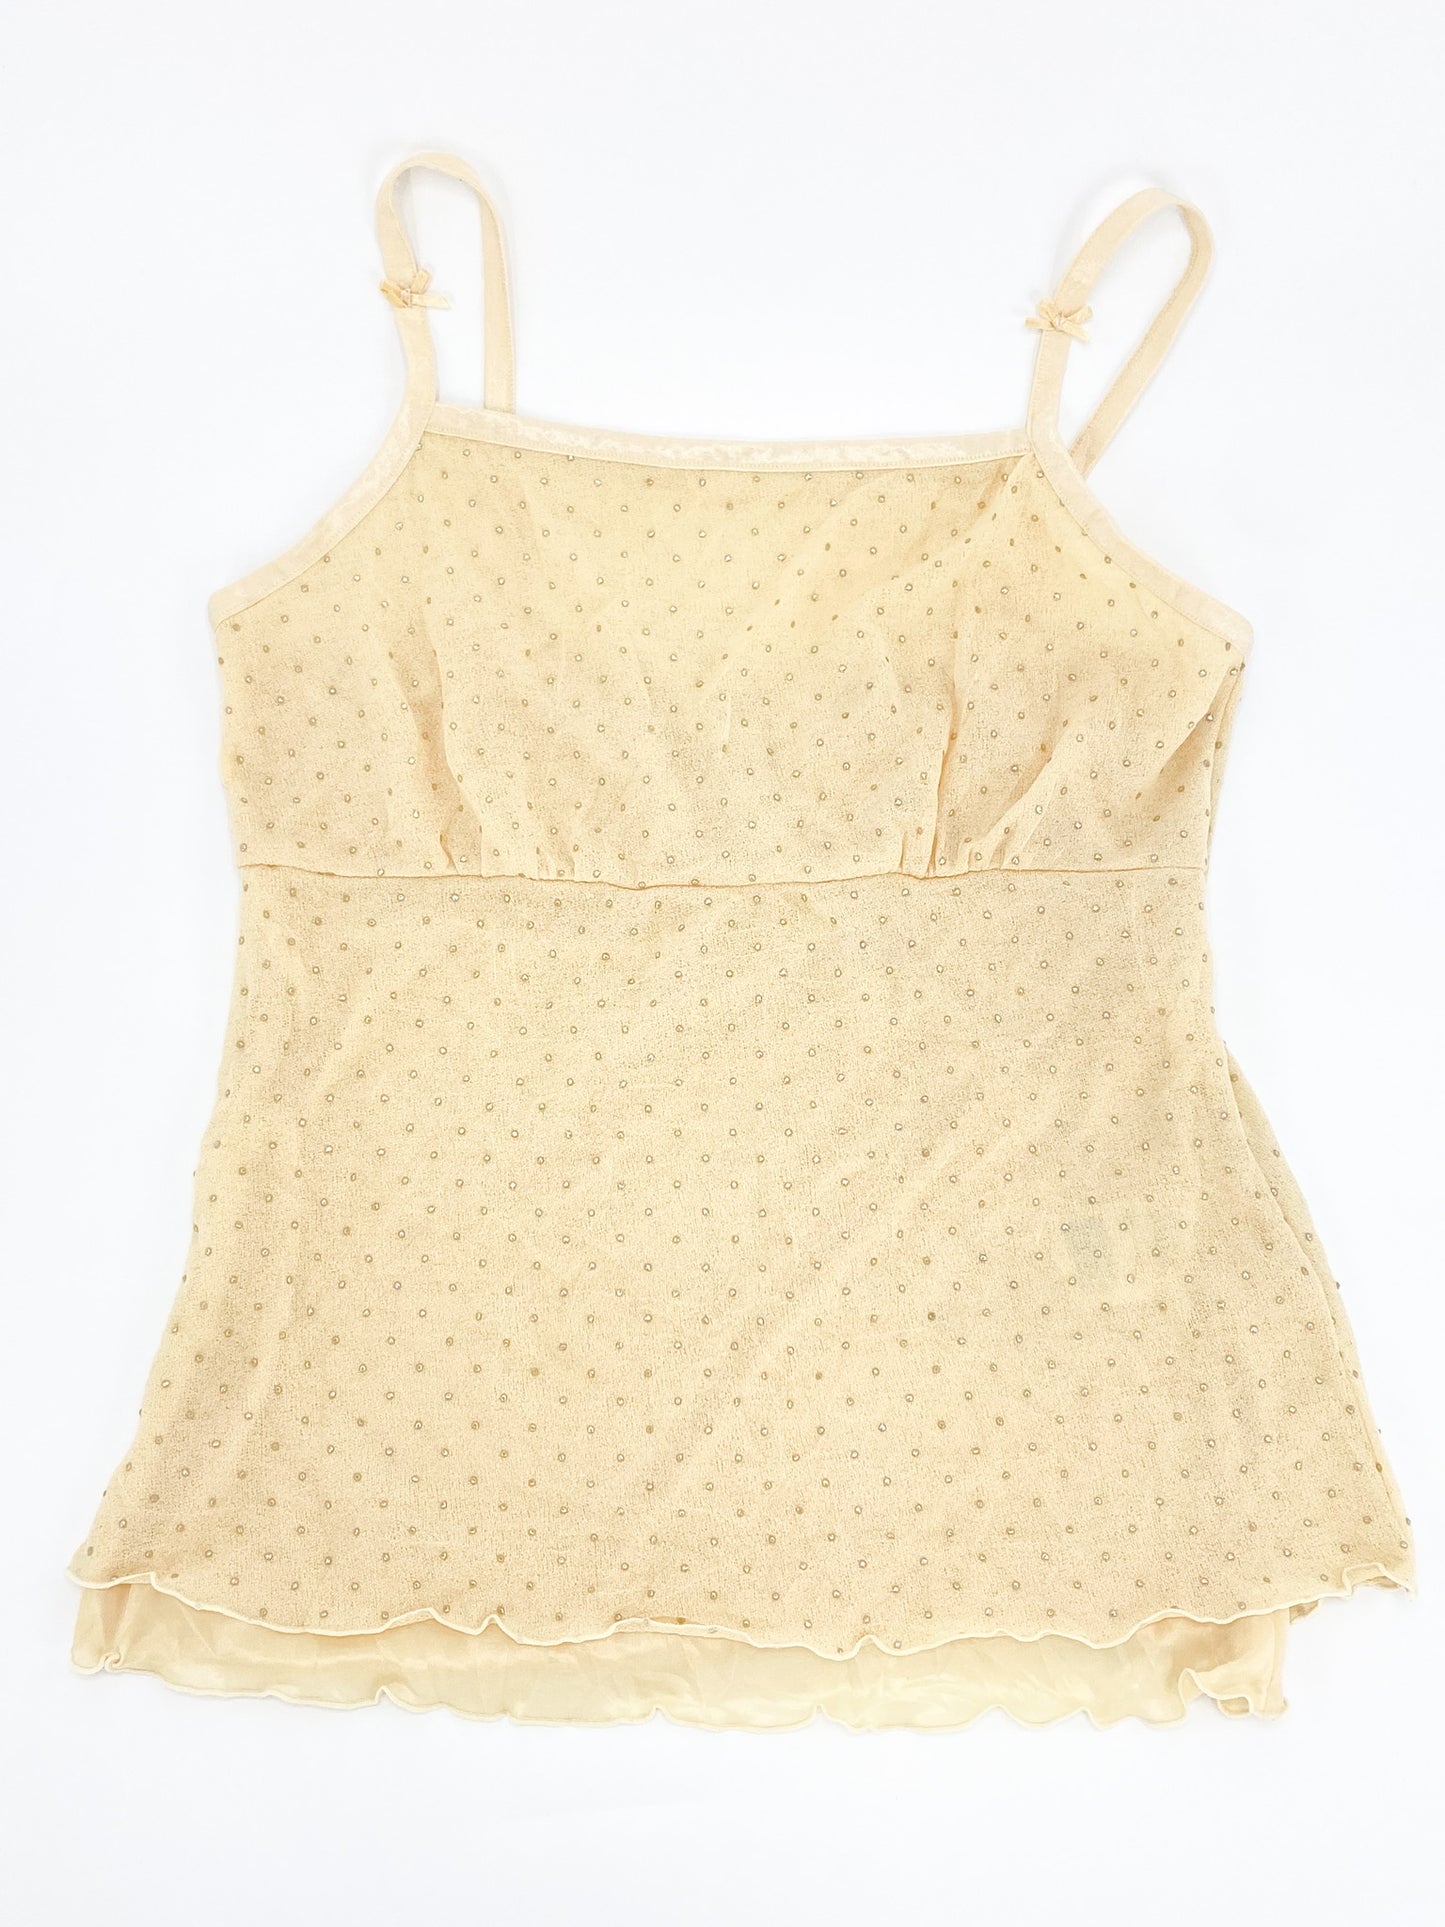 Vintage 00's Cream Singlet With Silver Dots - S